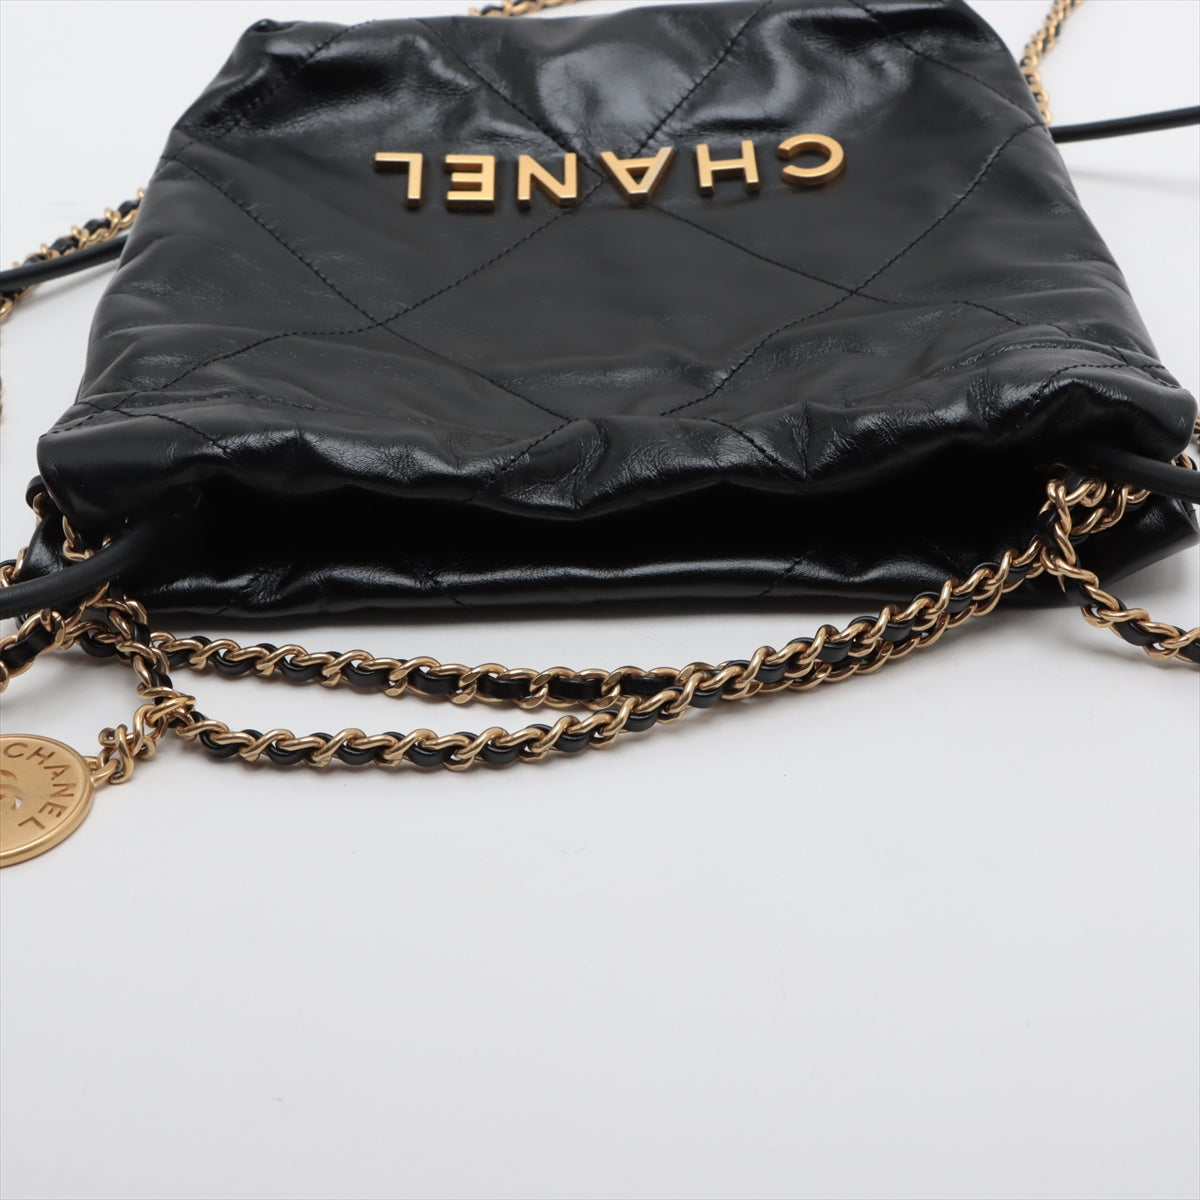 Chanel Chanel 22 mini Leather Chain shoulder bag Black Gold Metal fittings